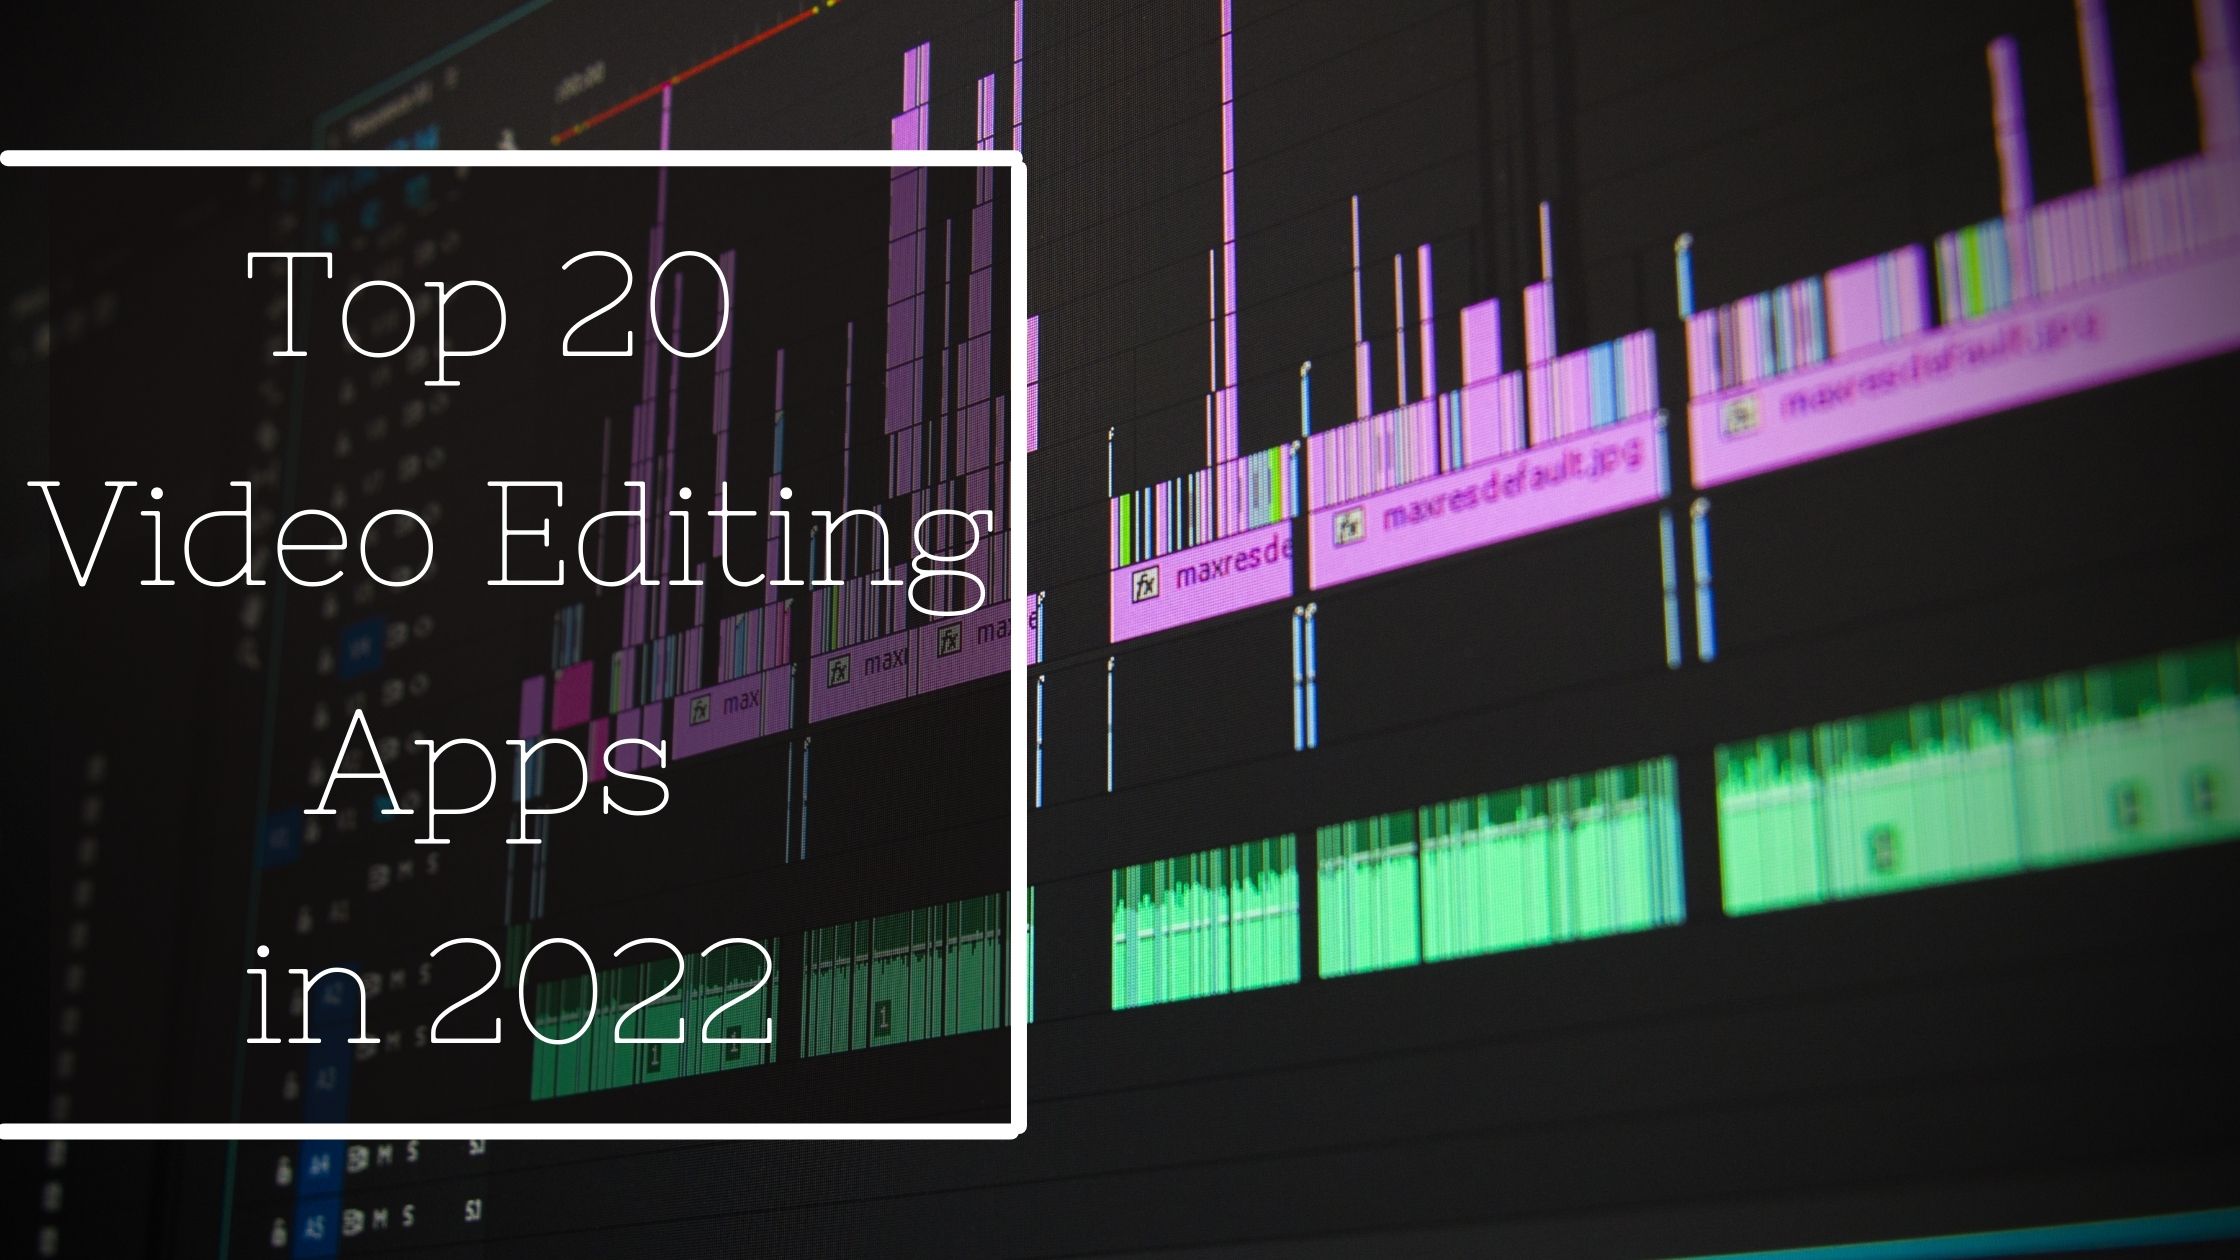 Top 20 Video Editing Apps in 2022